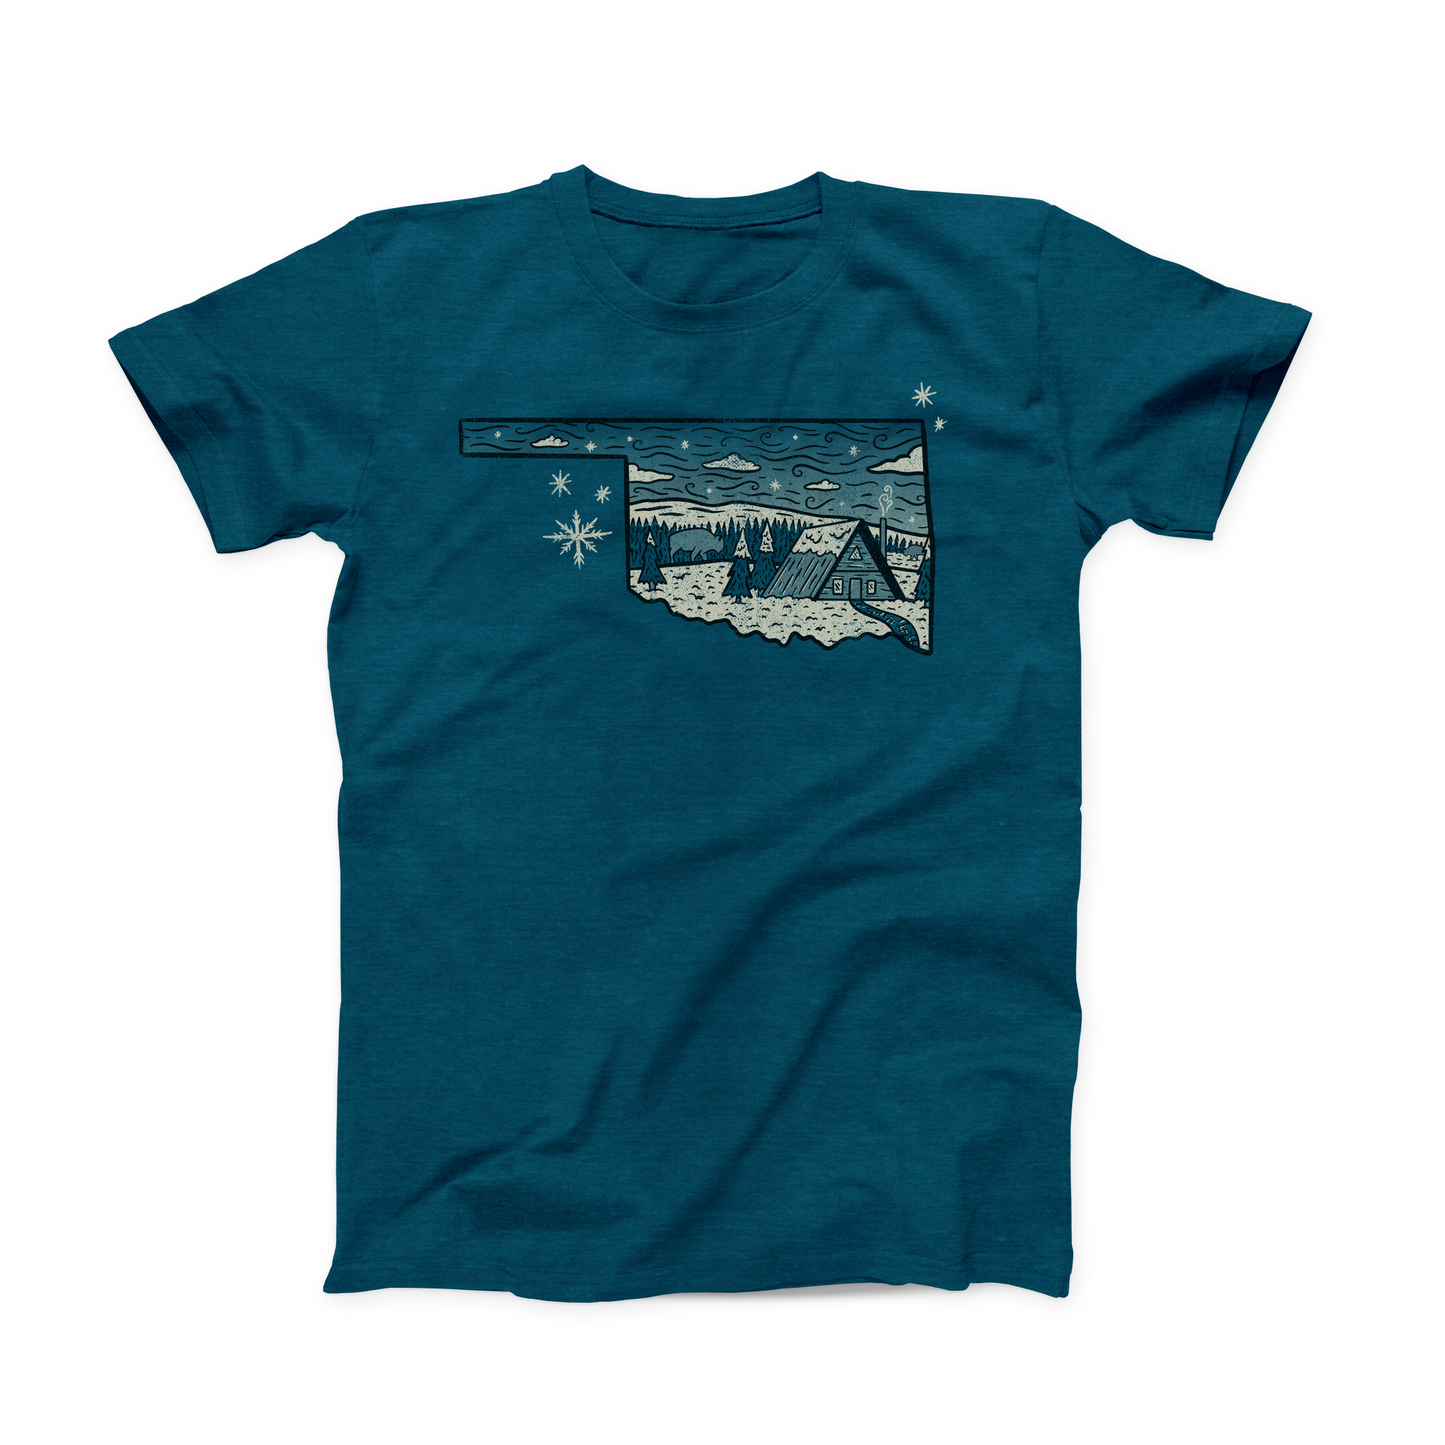 Deep Teal colored Oklahoma T-shirt. The design is done in white and black and shows a snowy cabin scene inside of the shape of the state. 